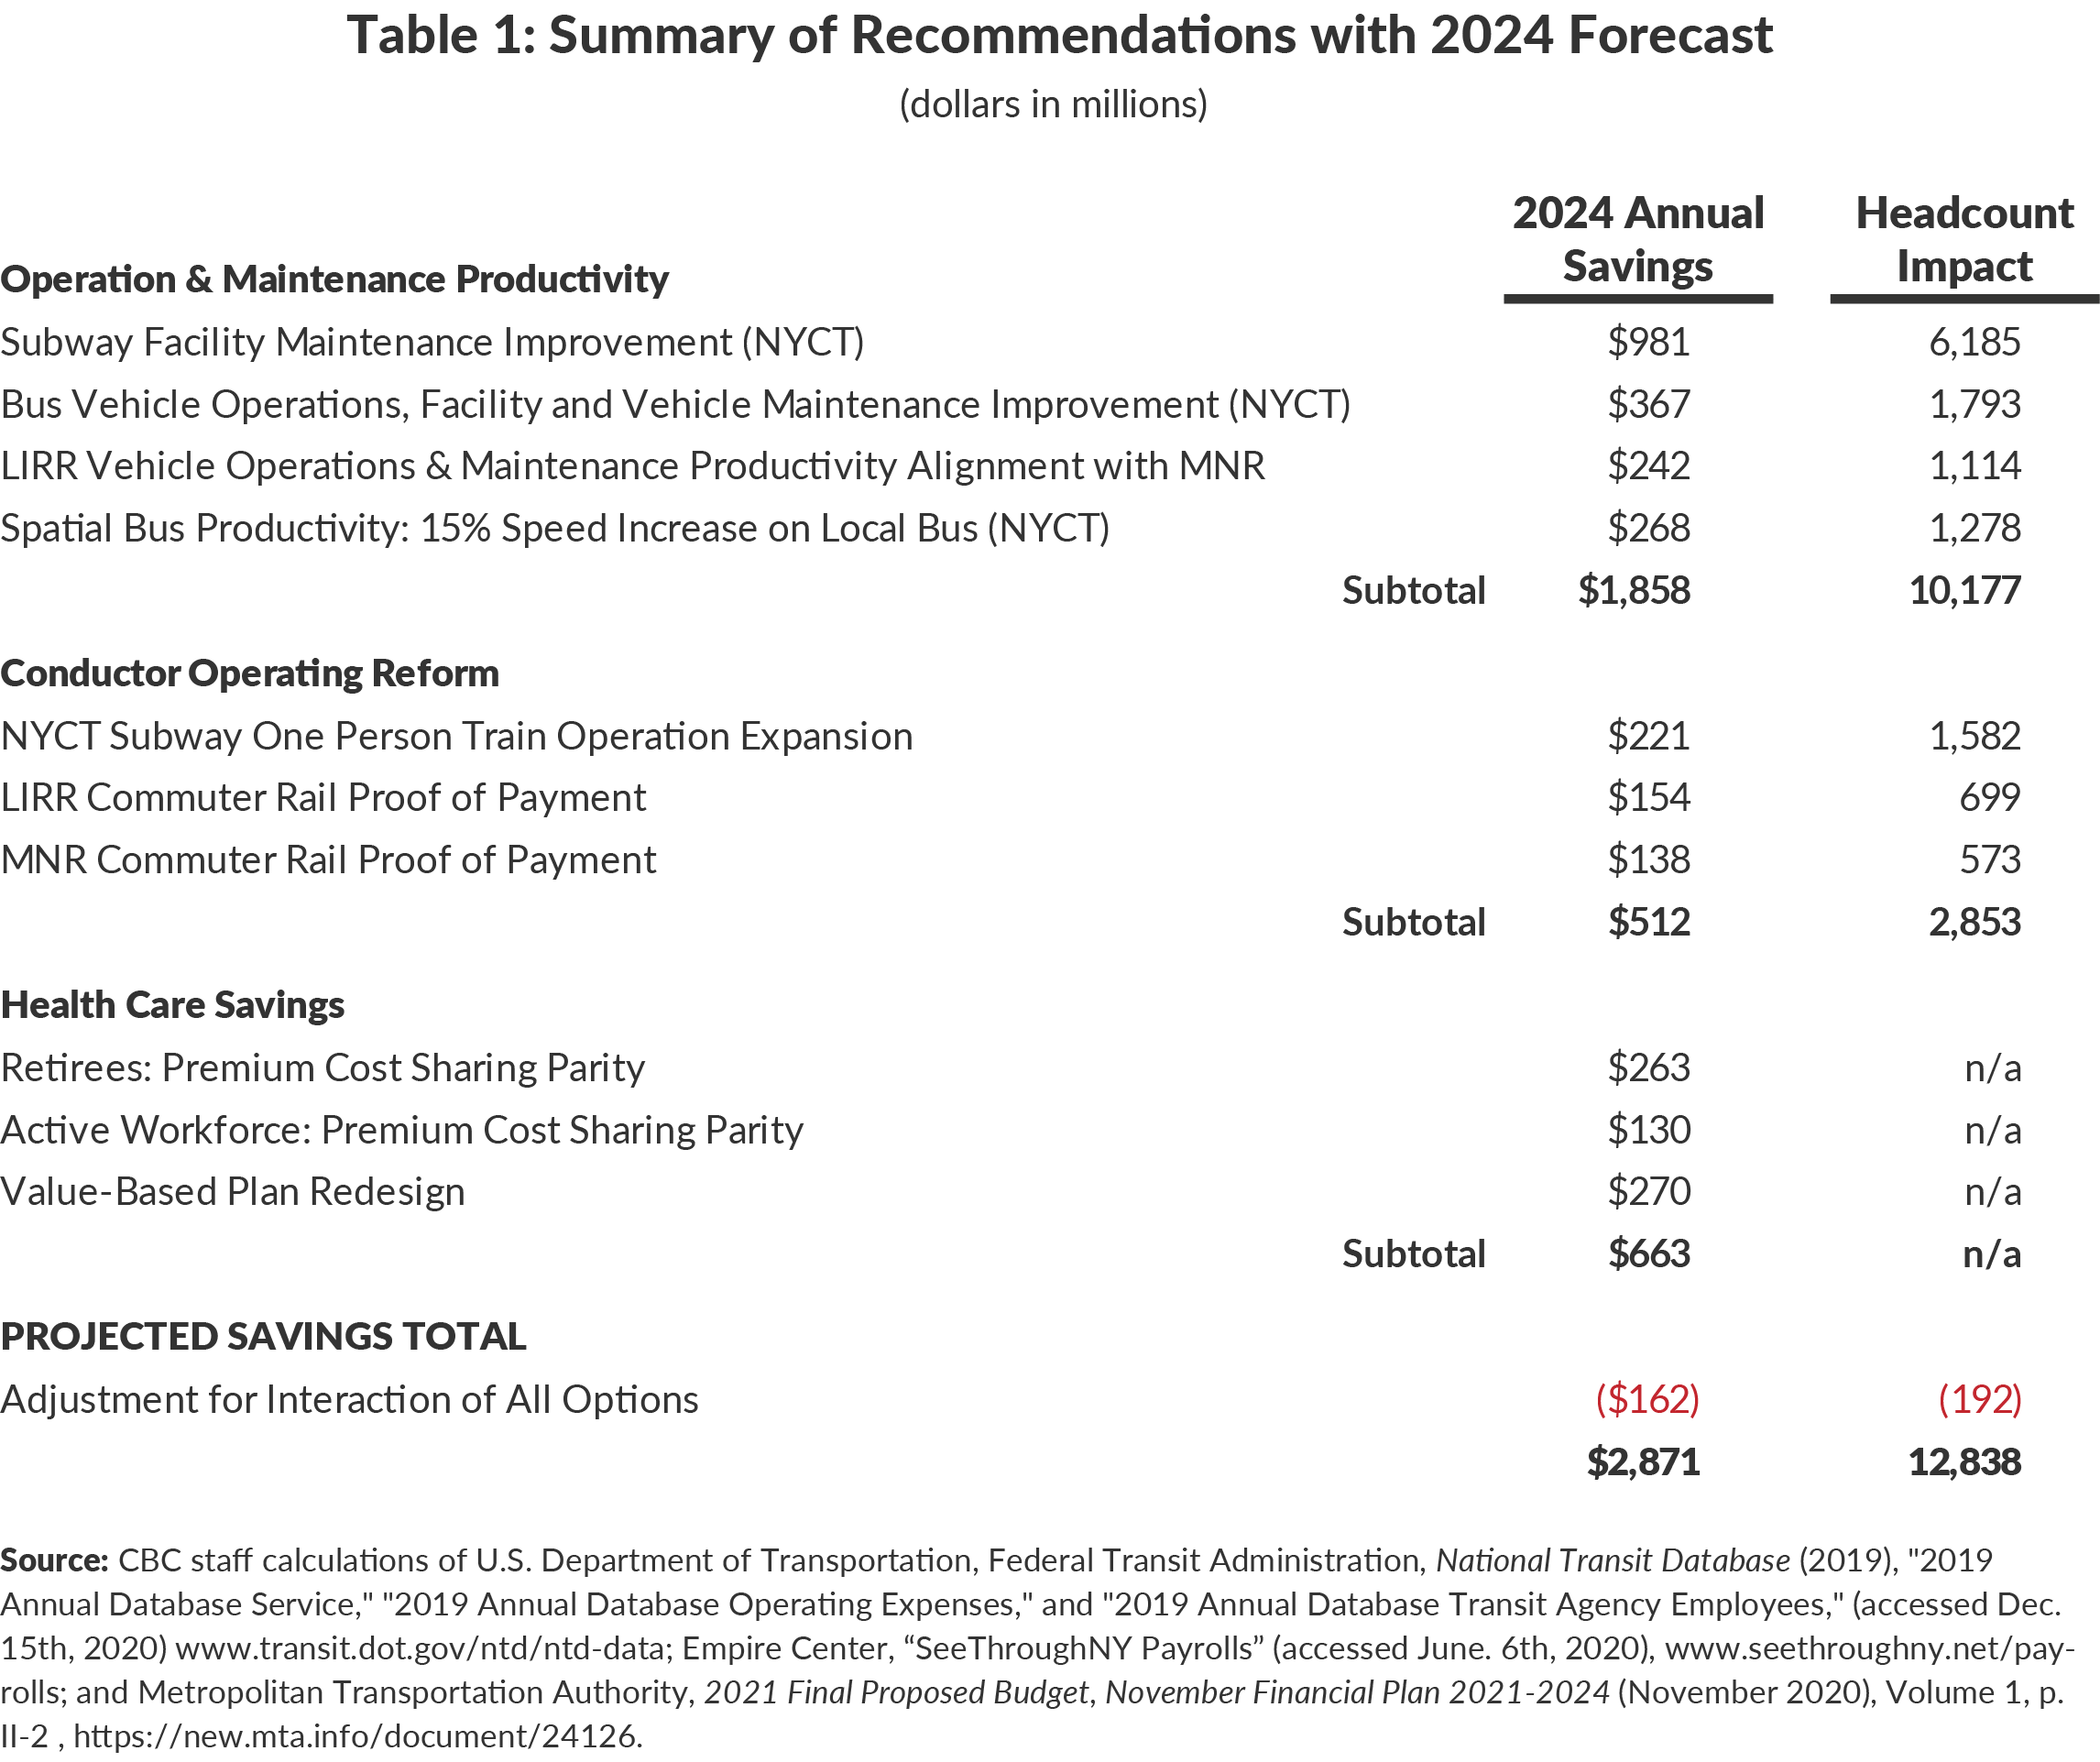 Table 1: Summary of Recommendations with 2024 Forecast